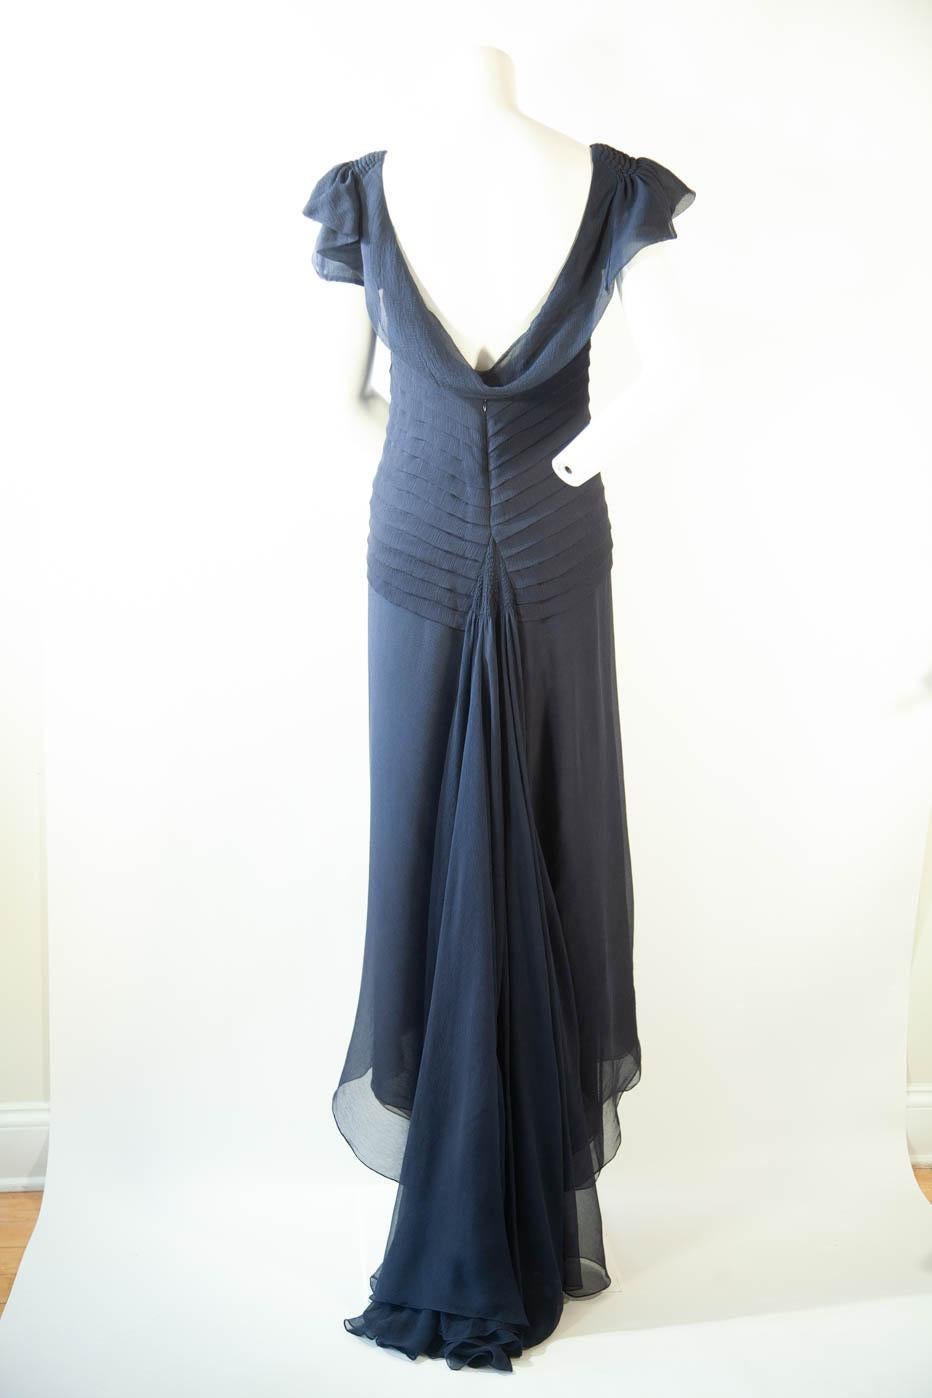 Vera Wang navy silk chiffon long gown, off-shoulder, pleated corset, with train. 

Provenance, owned by celebrity. Please inquire.

EU 38
US 4